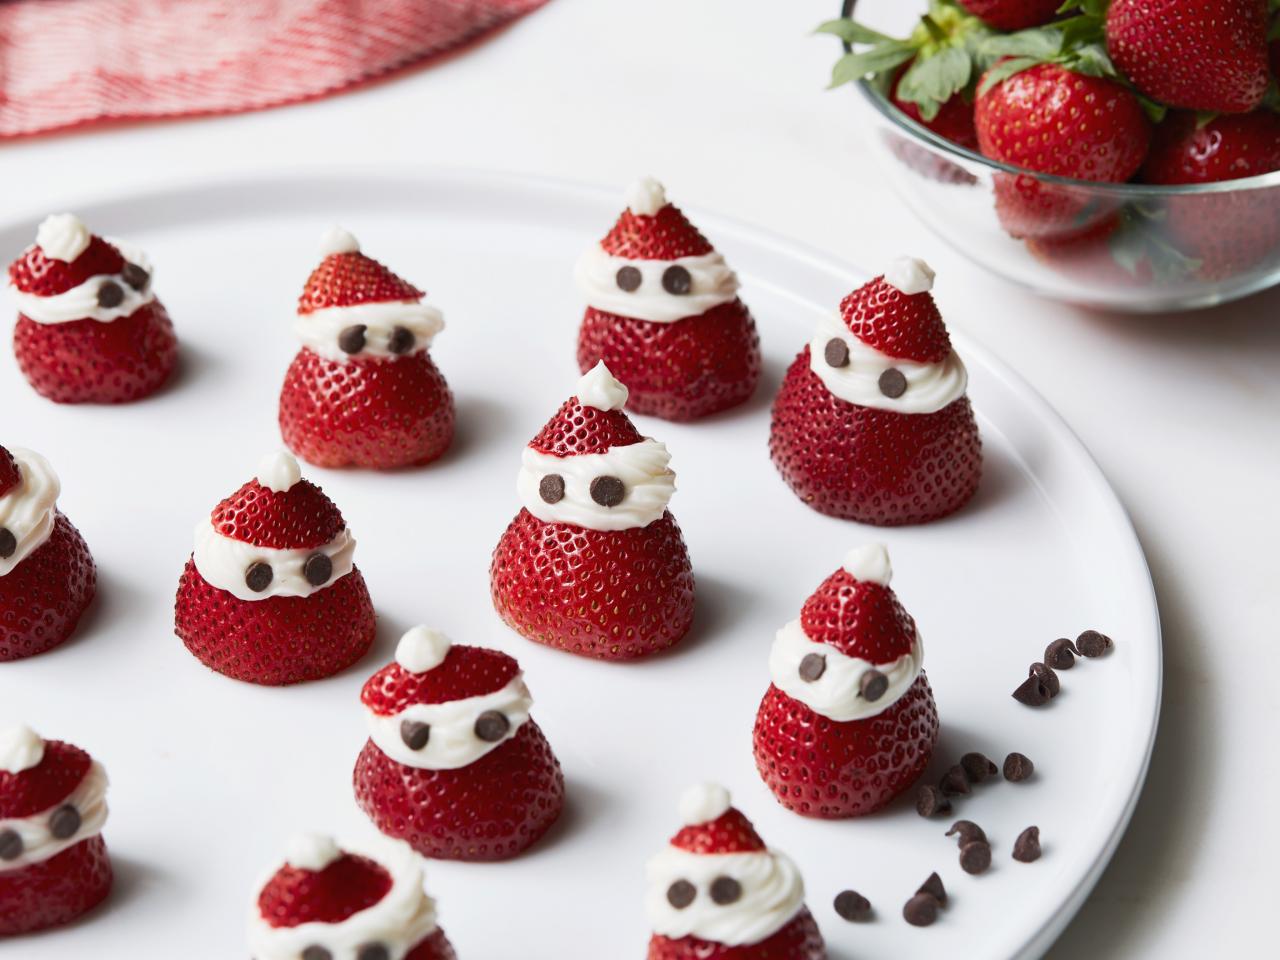 Over-the-Top Cute Christmas Desserts | FN Dish - Behind ...